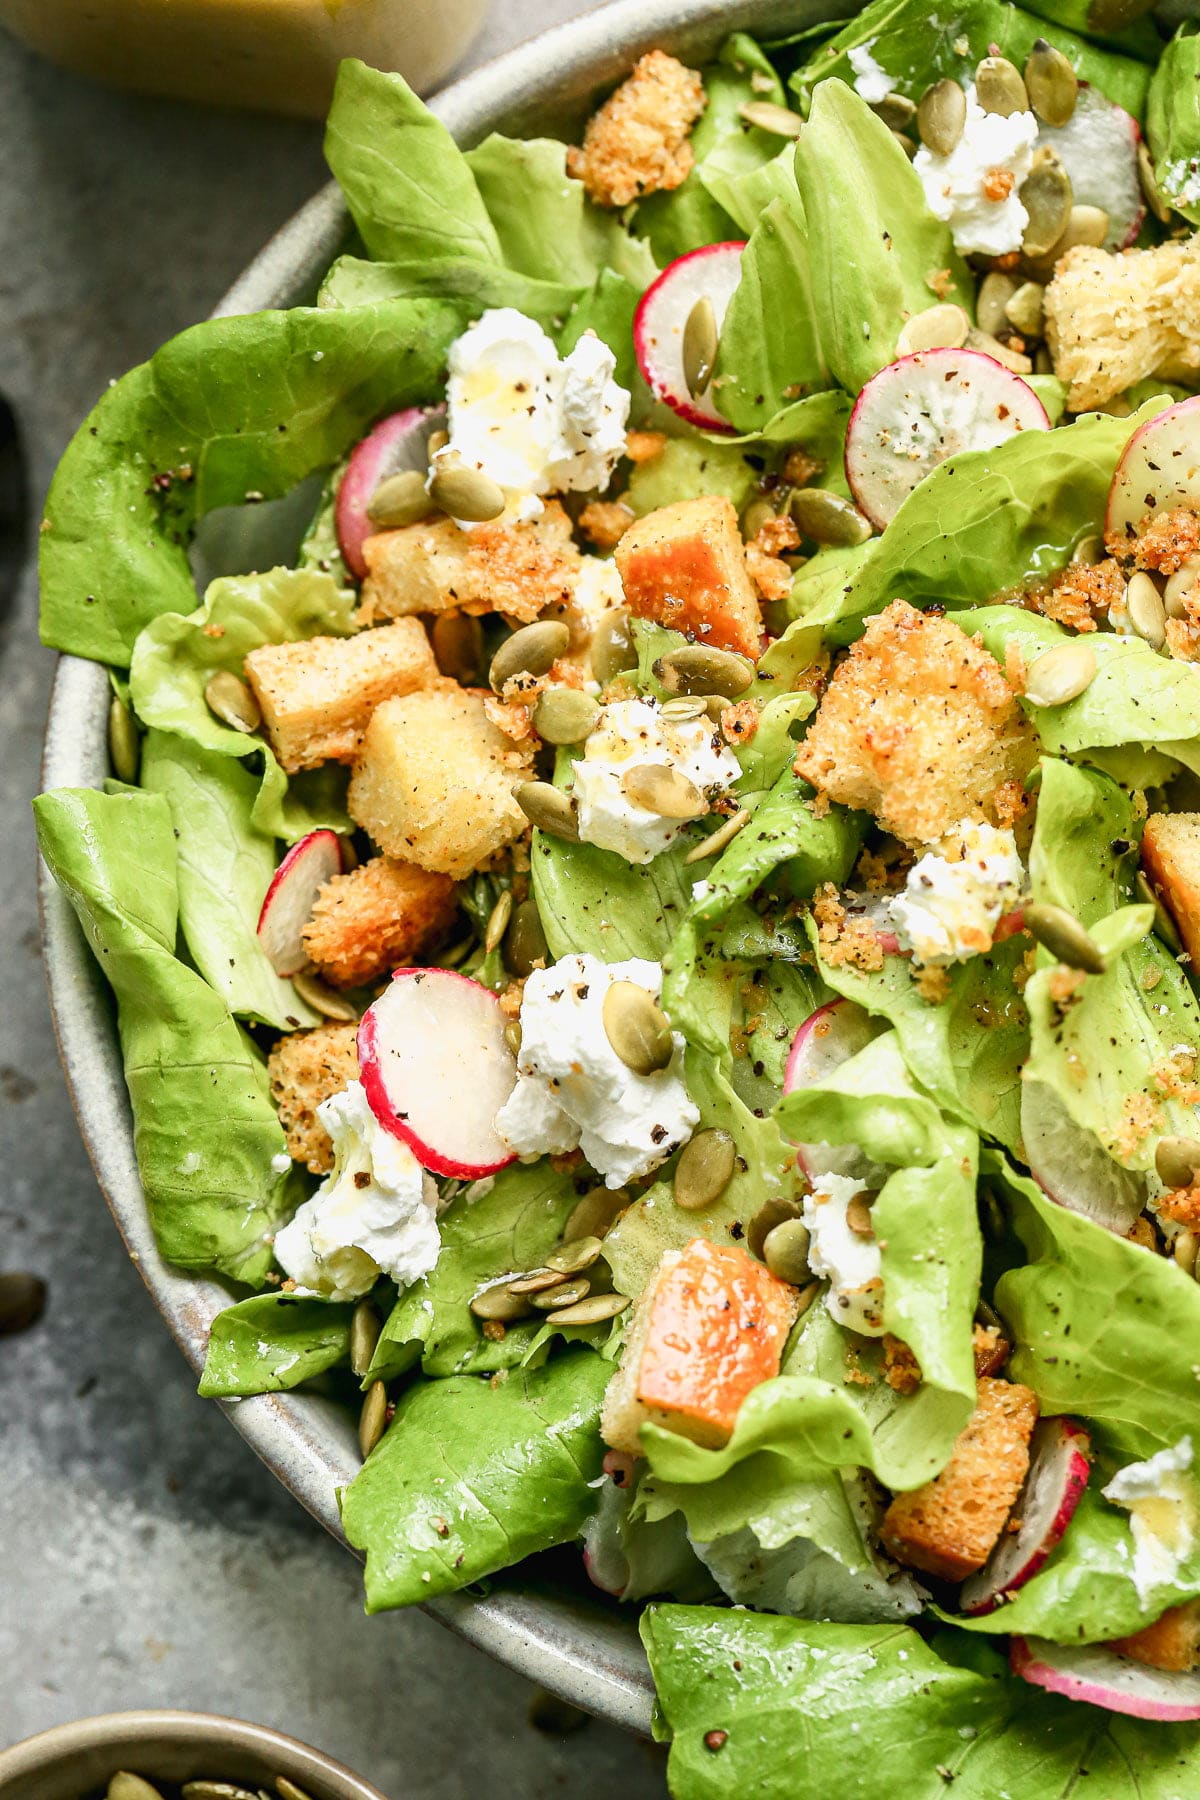 Summer is upon us and so are light, refreshing, seasonal salads. Brimming with homemade croutons, creamy goat cheese, crunchy pepita seeds, and crisp radish, our Butter Lettuce Salad is an easy side dish we come back to time and time again. Prep the dressing and croutons at the beginning of the week and enjoy a little bit every day.&nbsp;